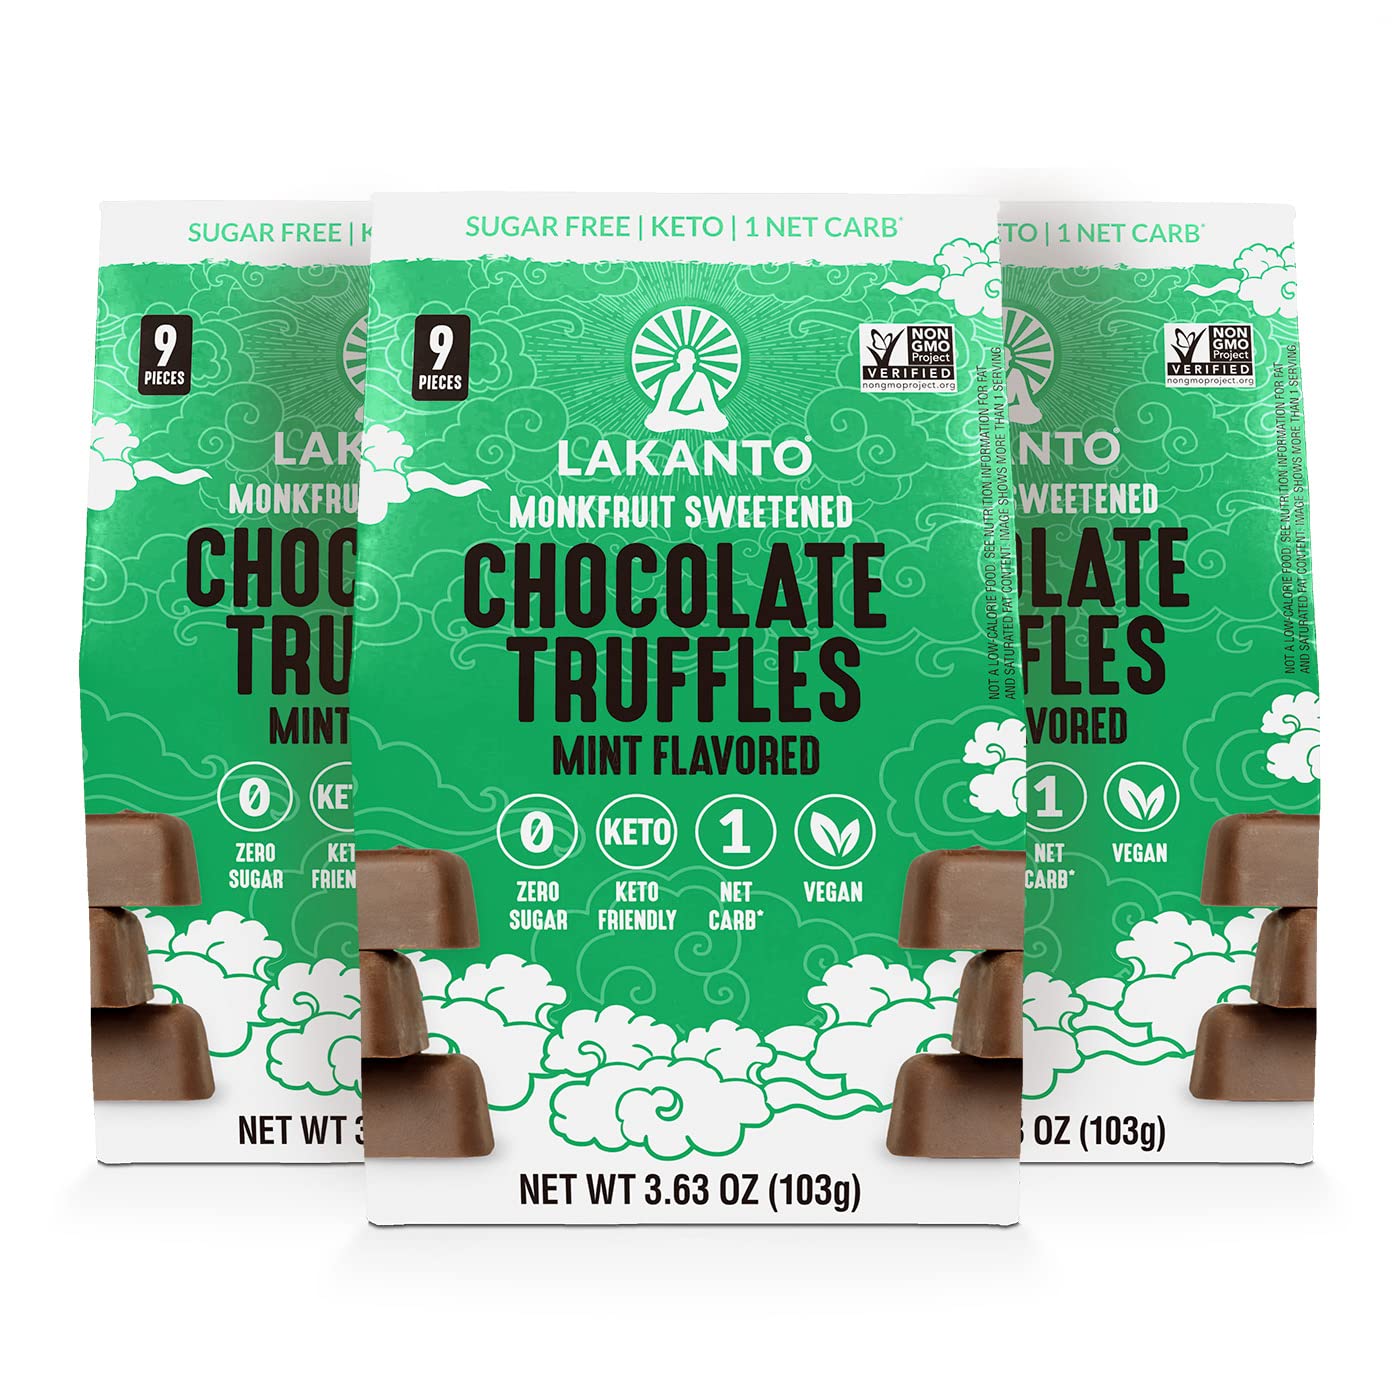 Lakanto Sugar Free Chocolate Truffles - Sweetened with Monk Fruit, Keto Diet Friendly, Vegan, 1 Net Carb, Creamy, Smooth, Delicious (Mint -Pack of 3)